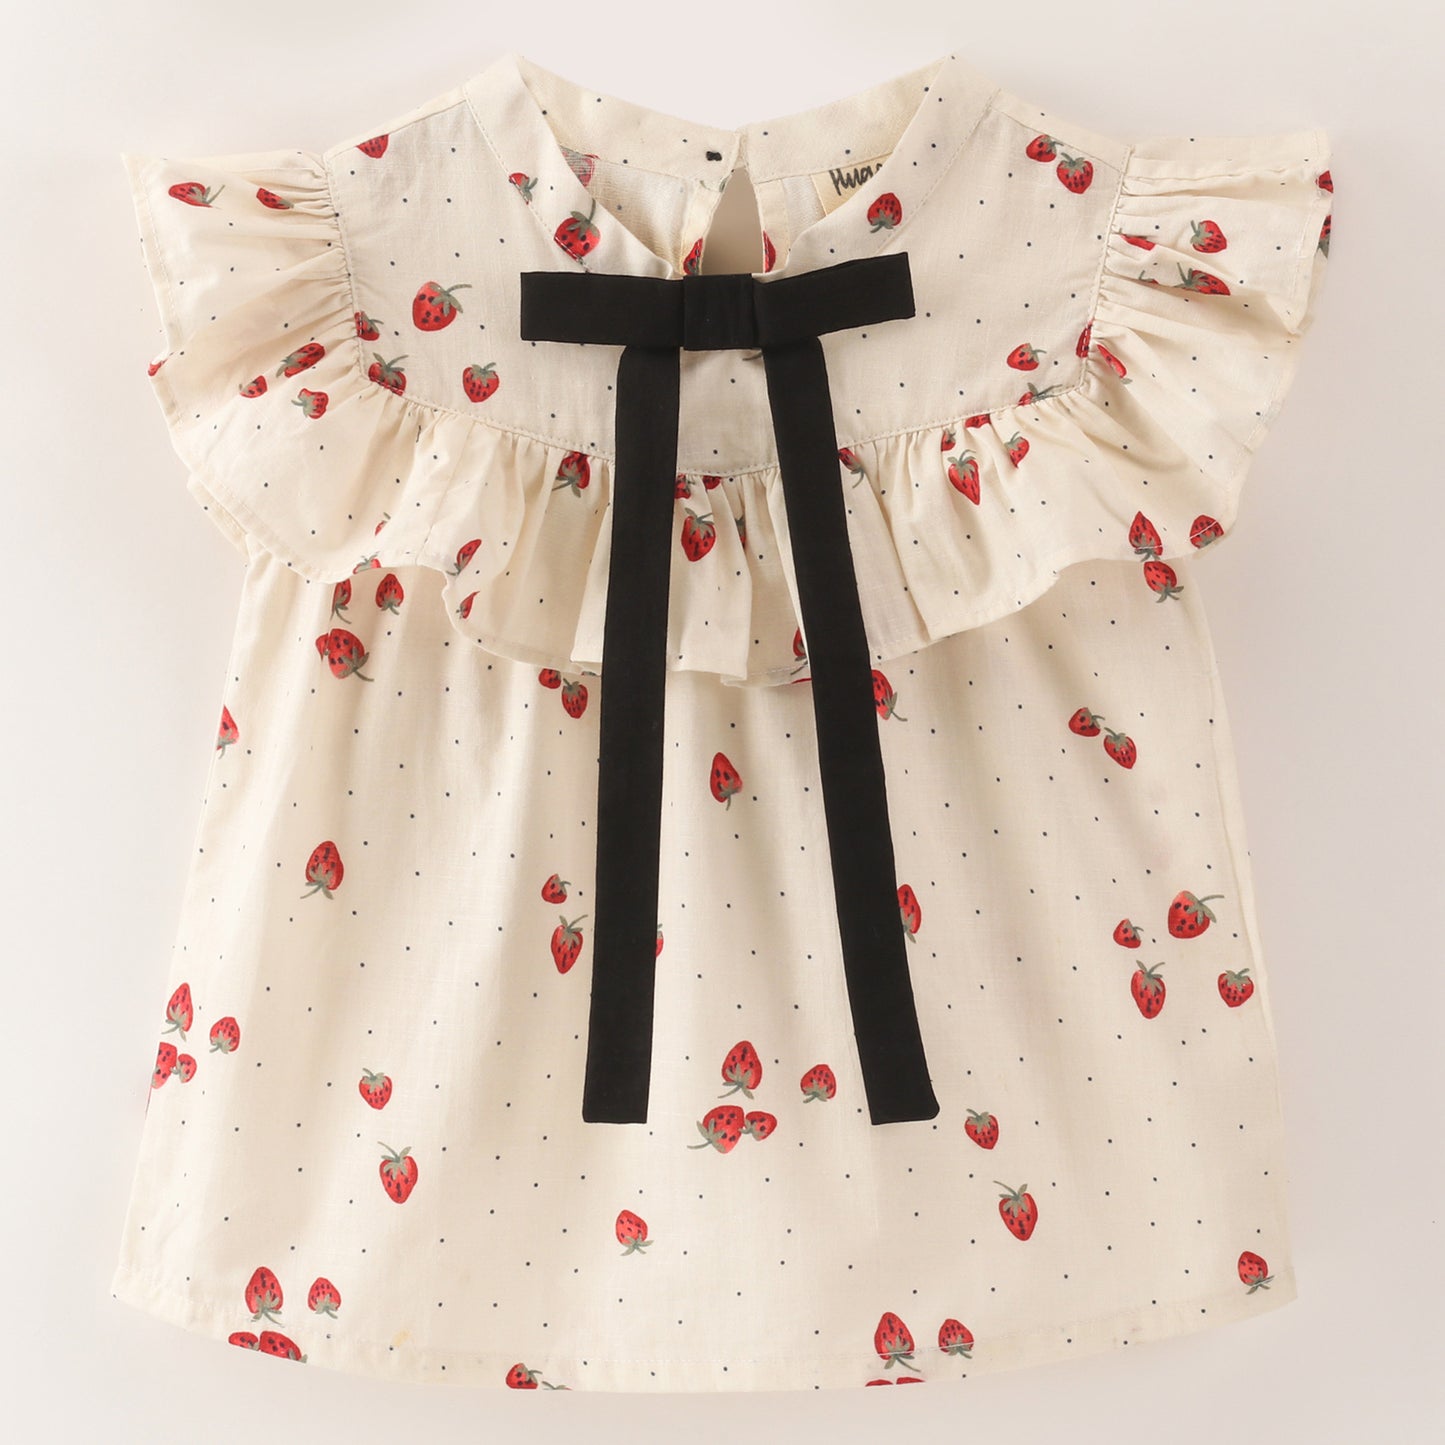 White top with strawberry and dot print with black bow tie at neck